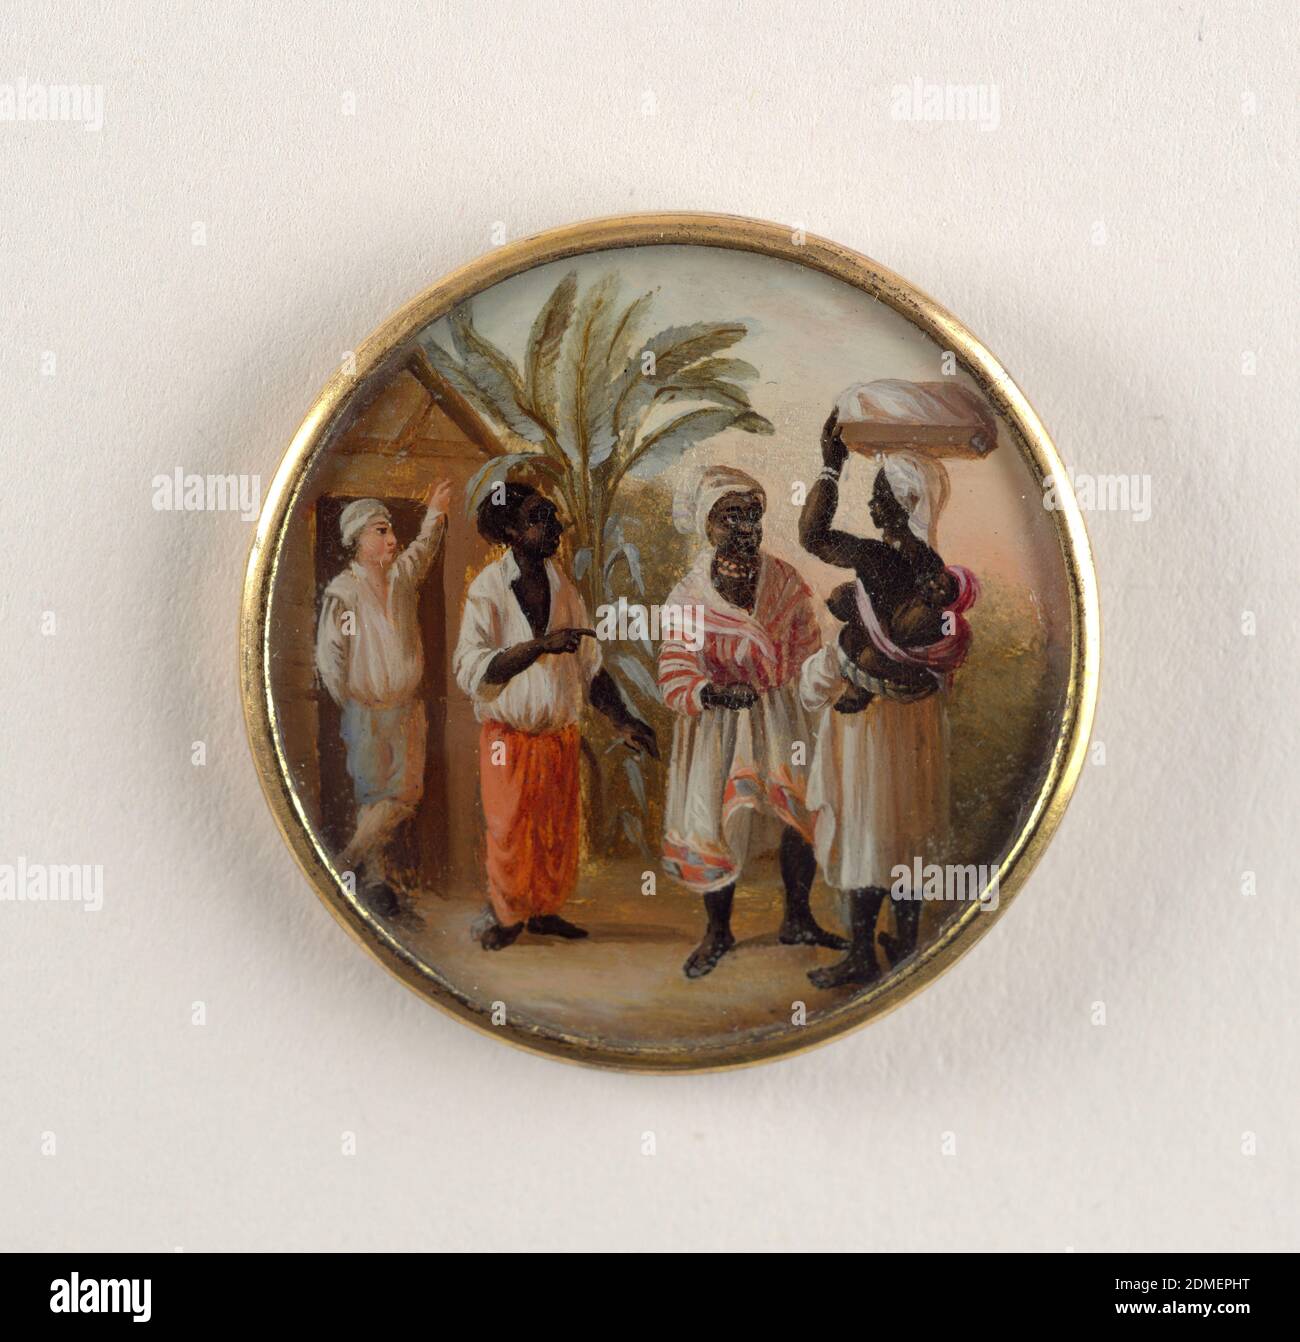 Button, Gouache paint on ivory verre fixé (affixed to) glass, ivory (backing), gilt metal, Button depicting scene with four figures in a landscape with palm trees. At left, a light-skinned man at entrance of a hut, as black-skinned man and woman, dressed in Western style working clothes, converse with another woman who wears only a skirt, carrying a child on her back and a package on her head., late 18th century, costume & accessories, Decorative Arts, Button Stock Photo